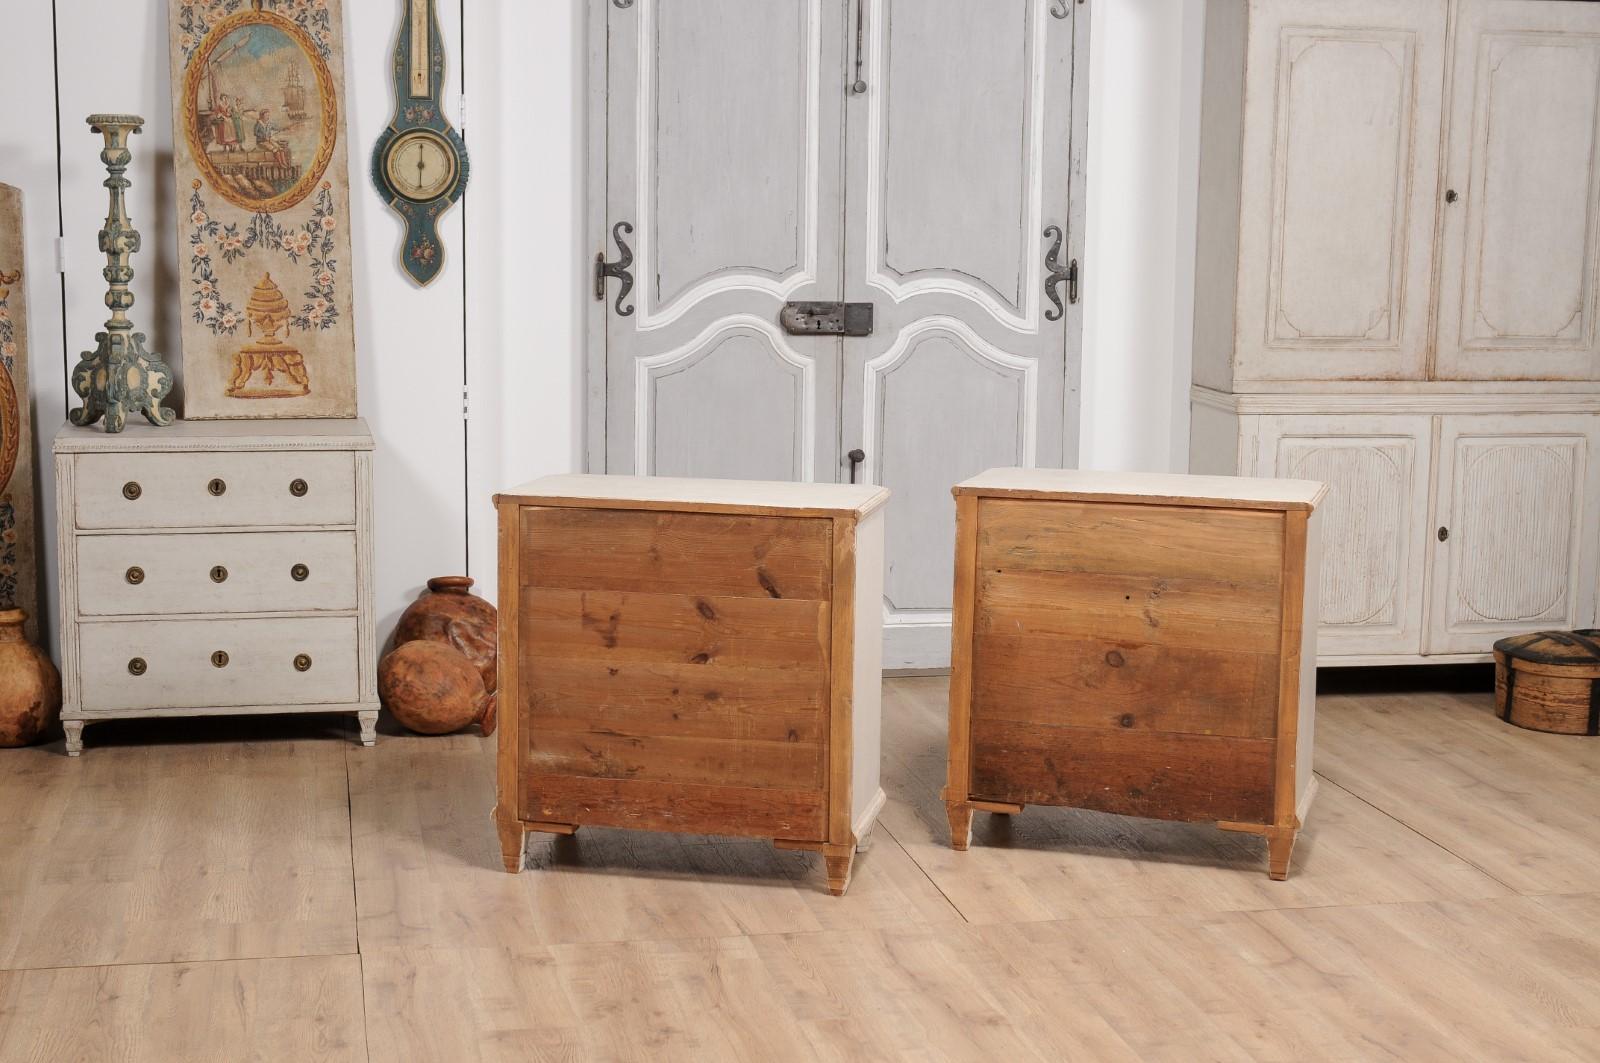 19th Century Swedish Gustavian Style Painted Three-Drawer Chests, a Pair For Sale 5